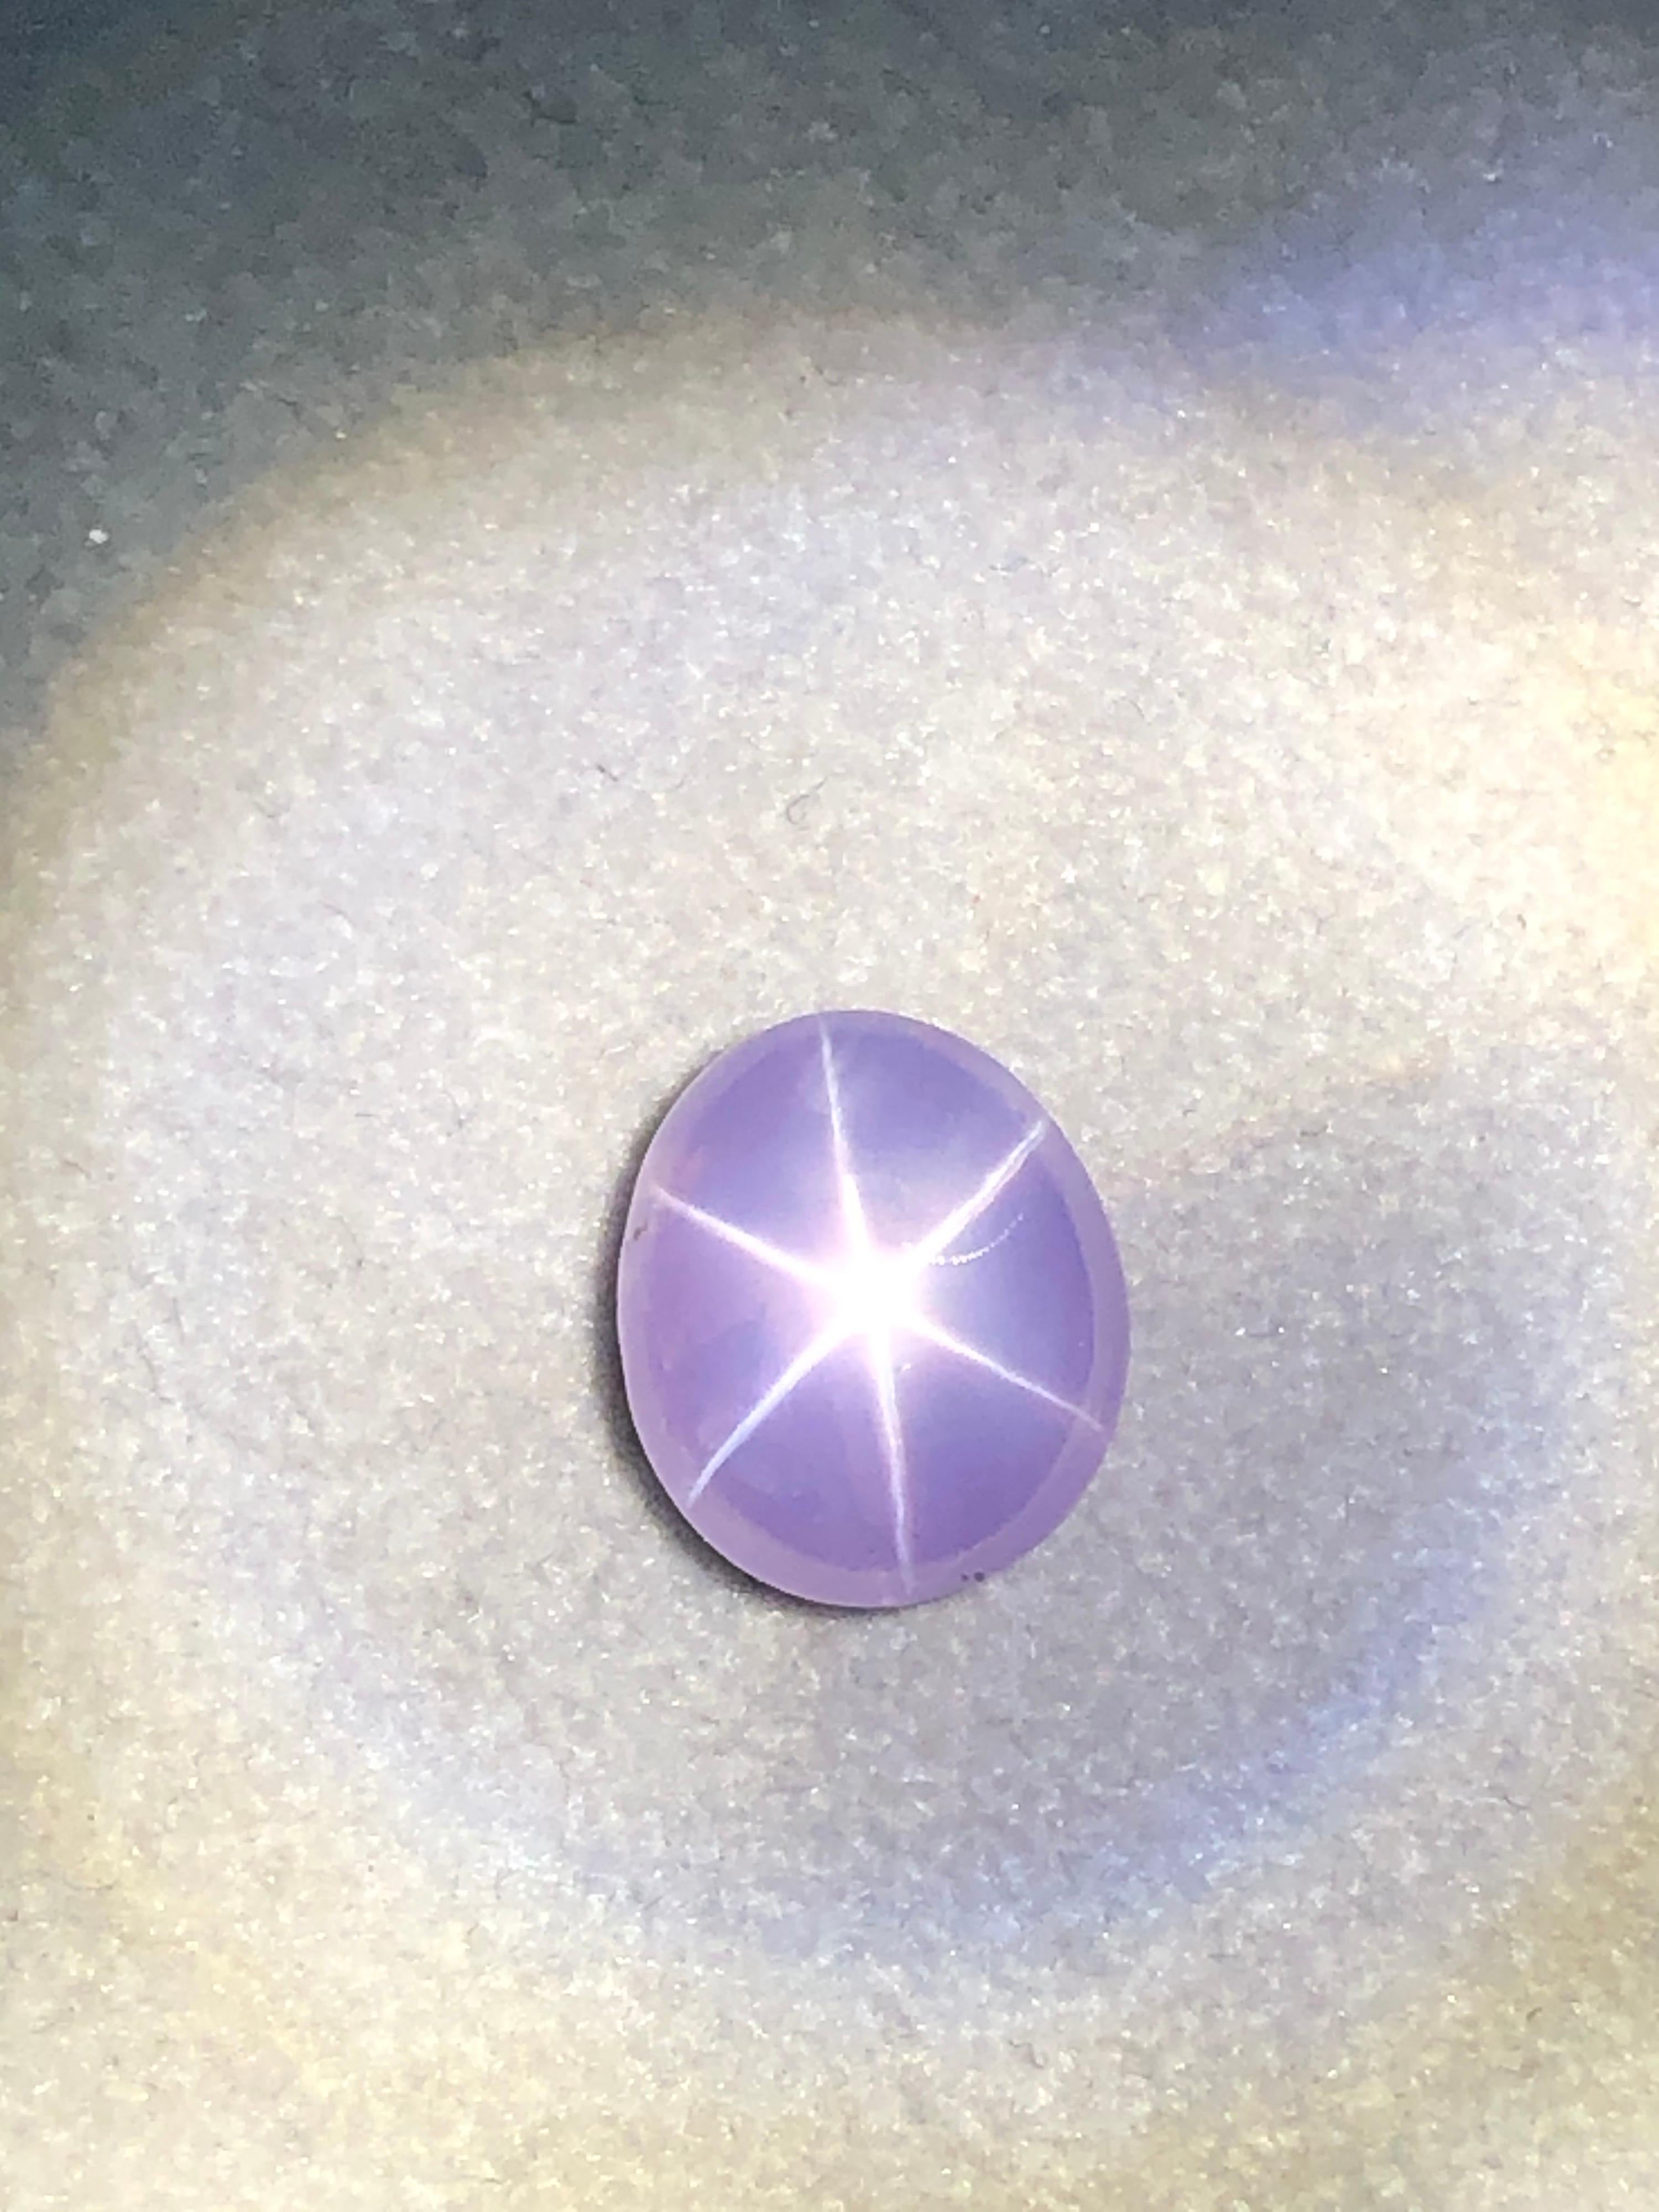 G.I.A certified, 8.60 carat, natural, unheated Ceylon Star Sapphire, oval cabochon gem, displaying a pinkish purple color, offered loose. This gem would make a very unique unisex ring or pendant.
We offer supreme fine custom jewelry work upon